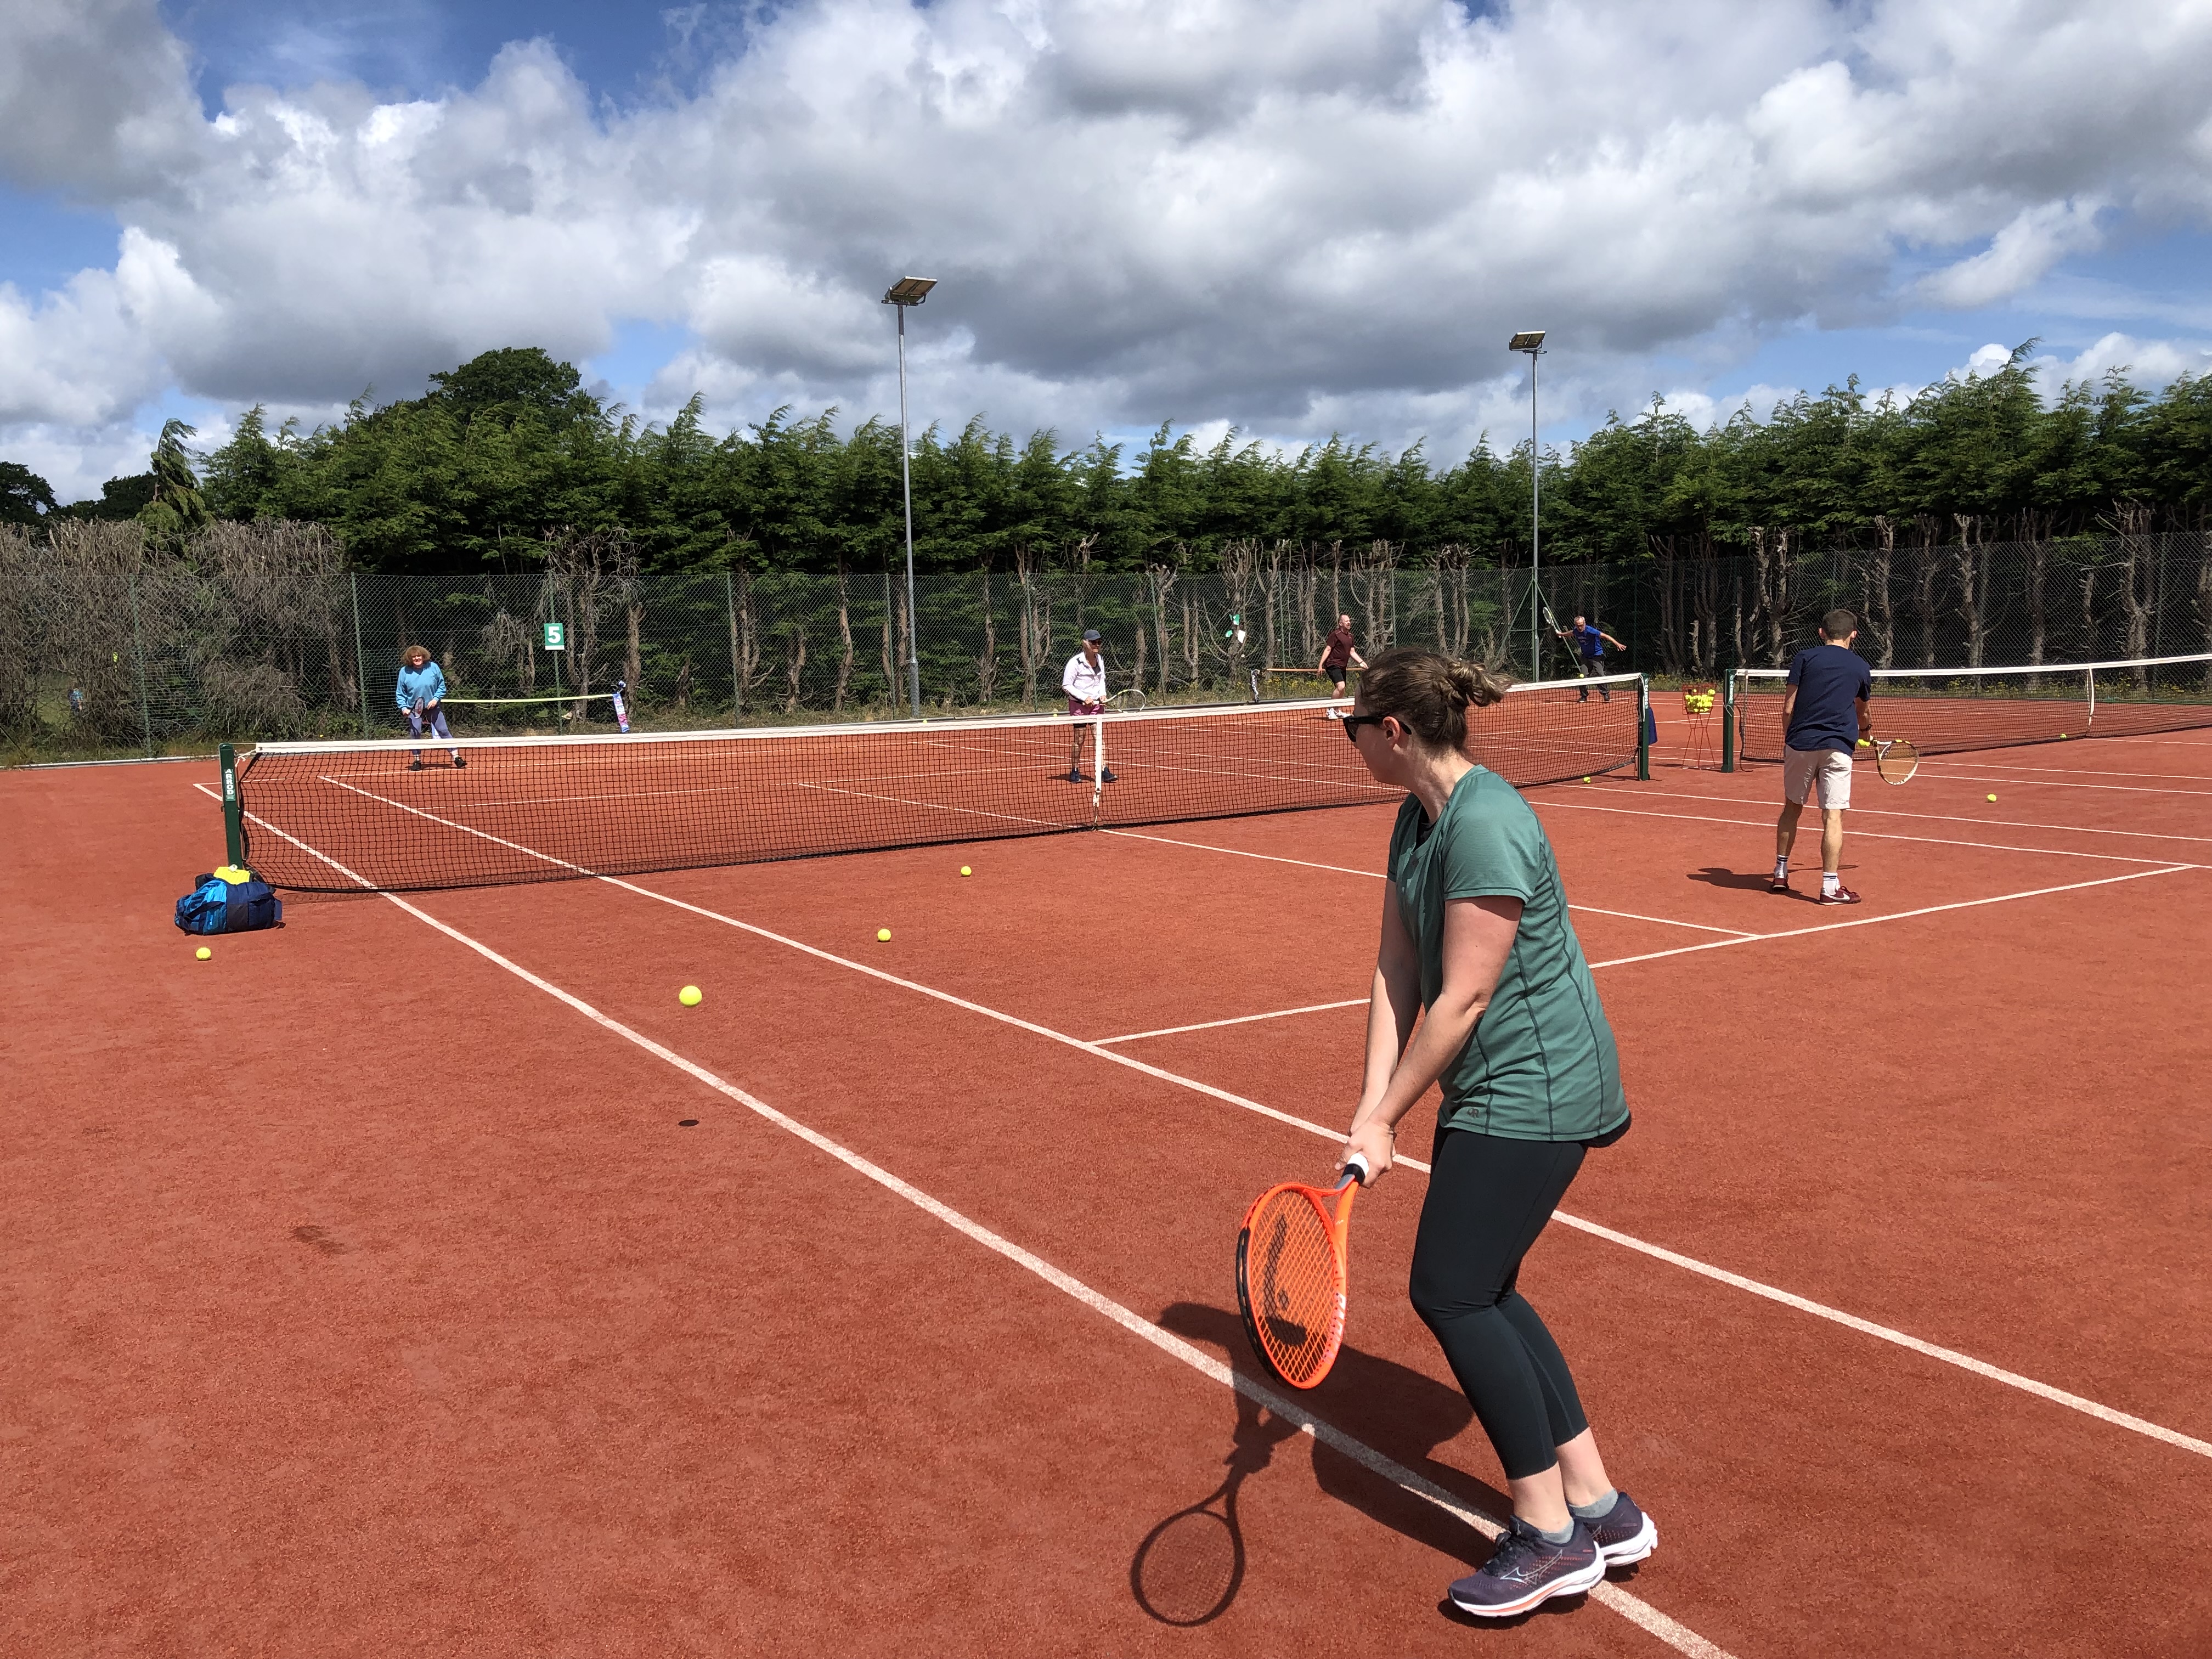 Players playing tennis